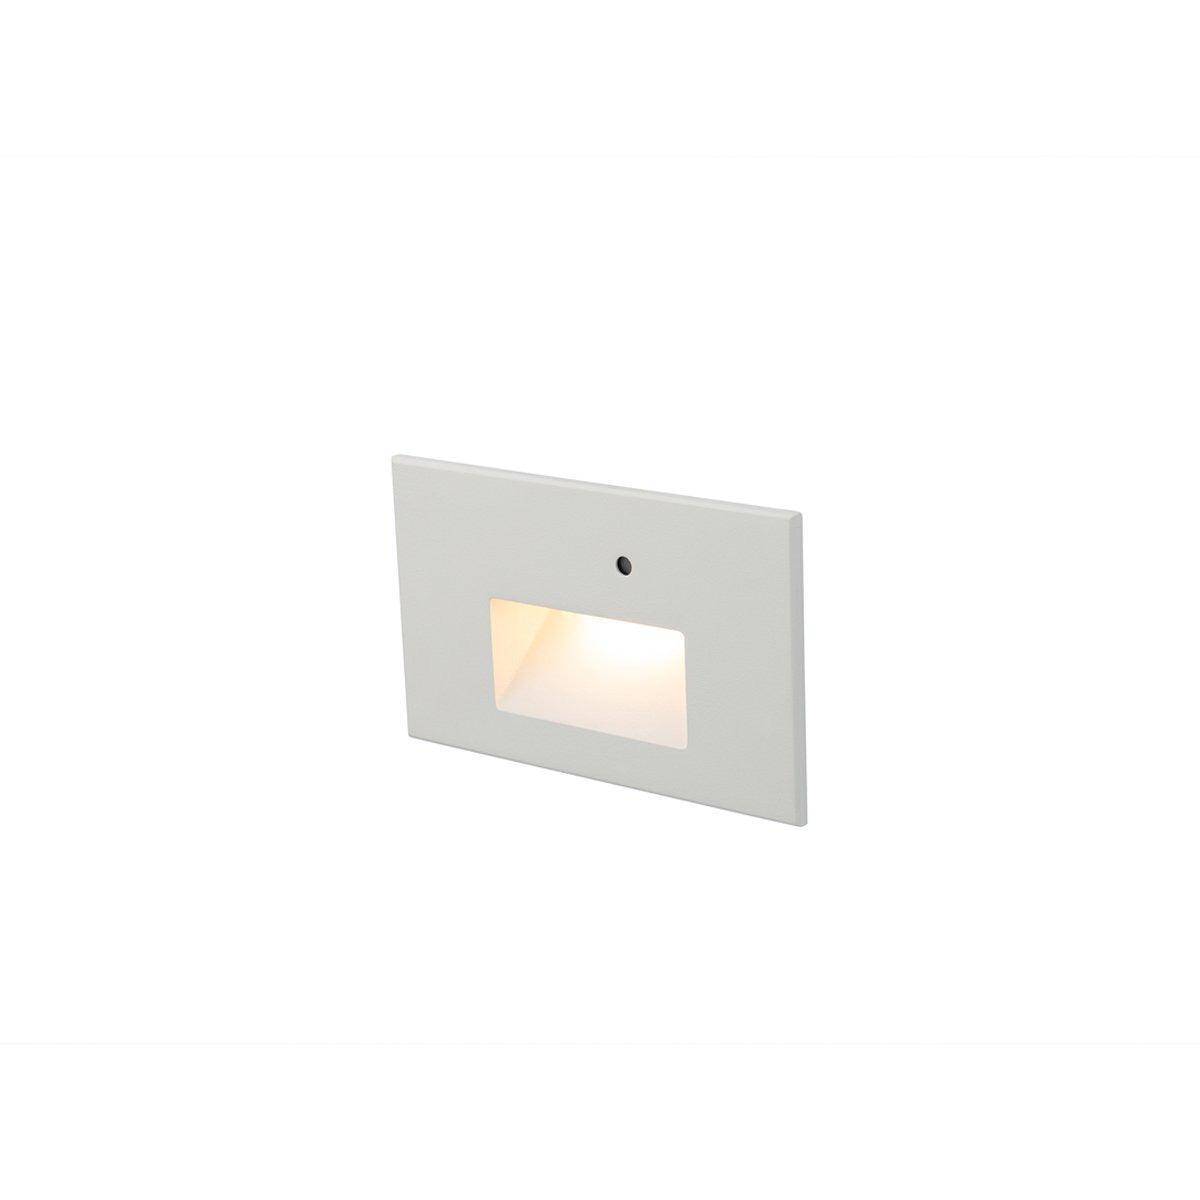 WAC Lighting - Step Light With Photocell Horizontal LED Step and Wall Light - WL-LED102-AM-WT | Montreal Lighting & Hardware